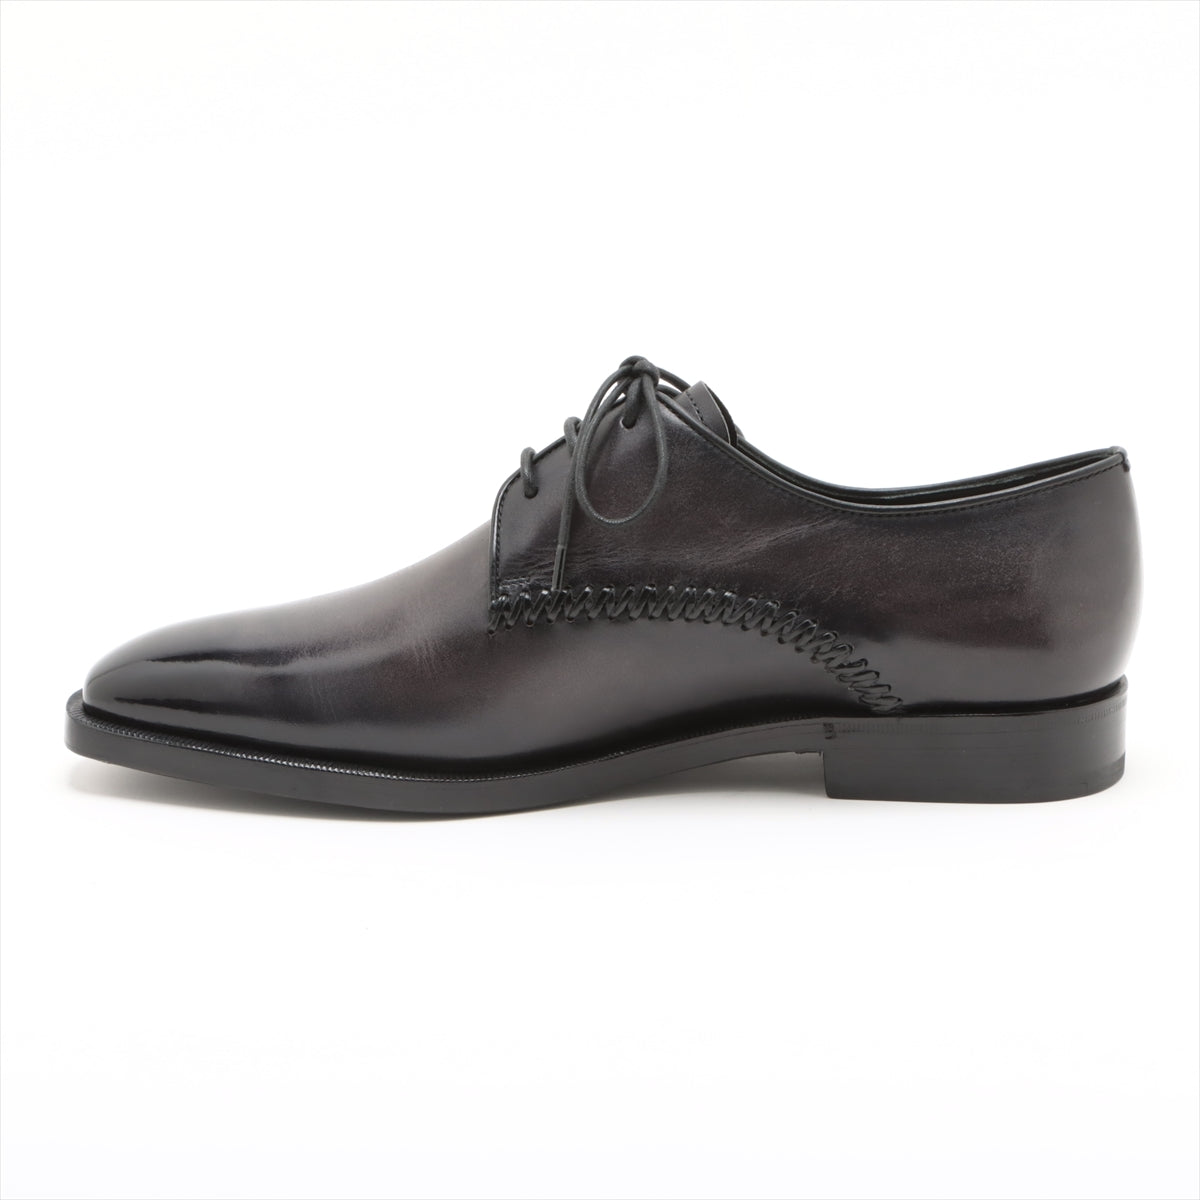 Berluti Leather Leather shoes 6 1/2 Men's Black Is there a replacement string Comes with genuine shoe tree